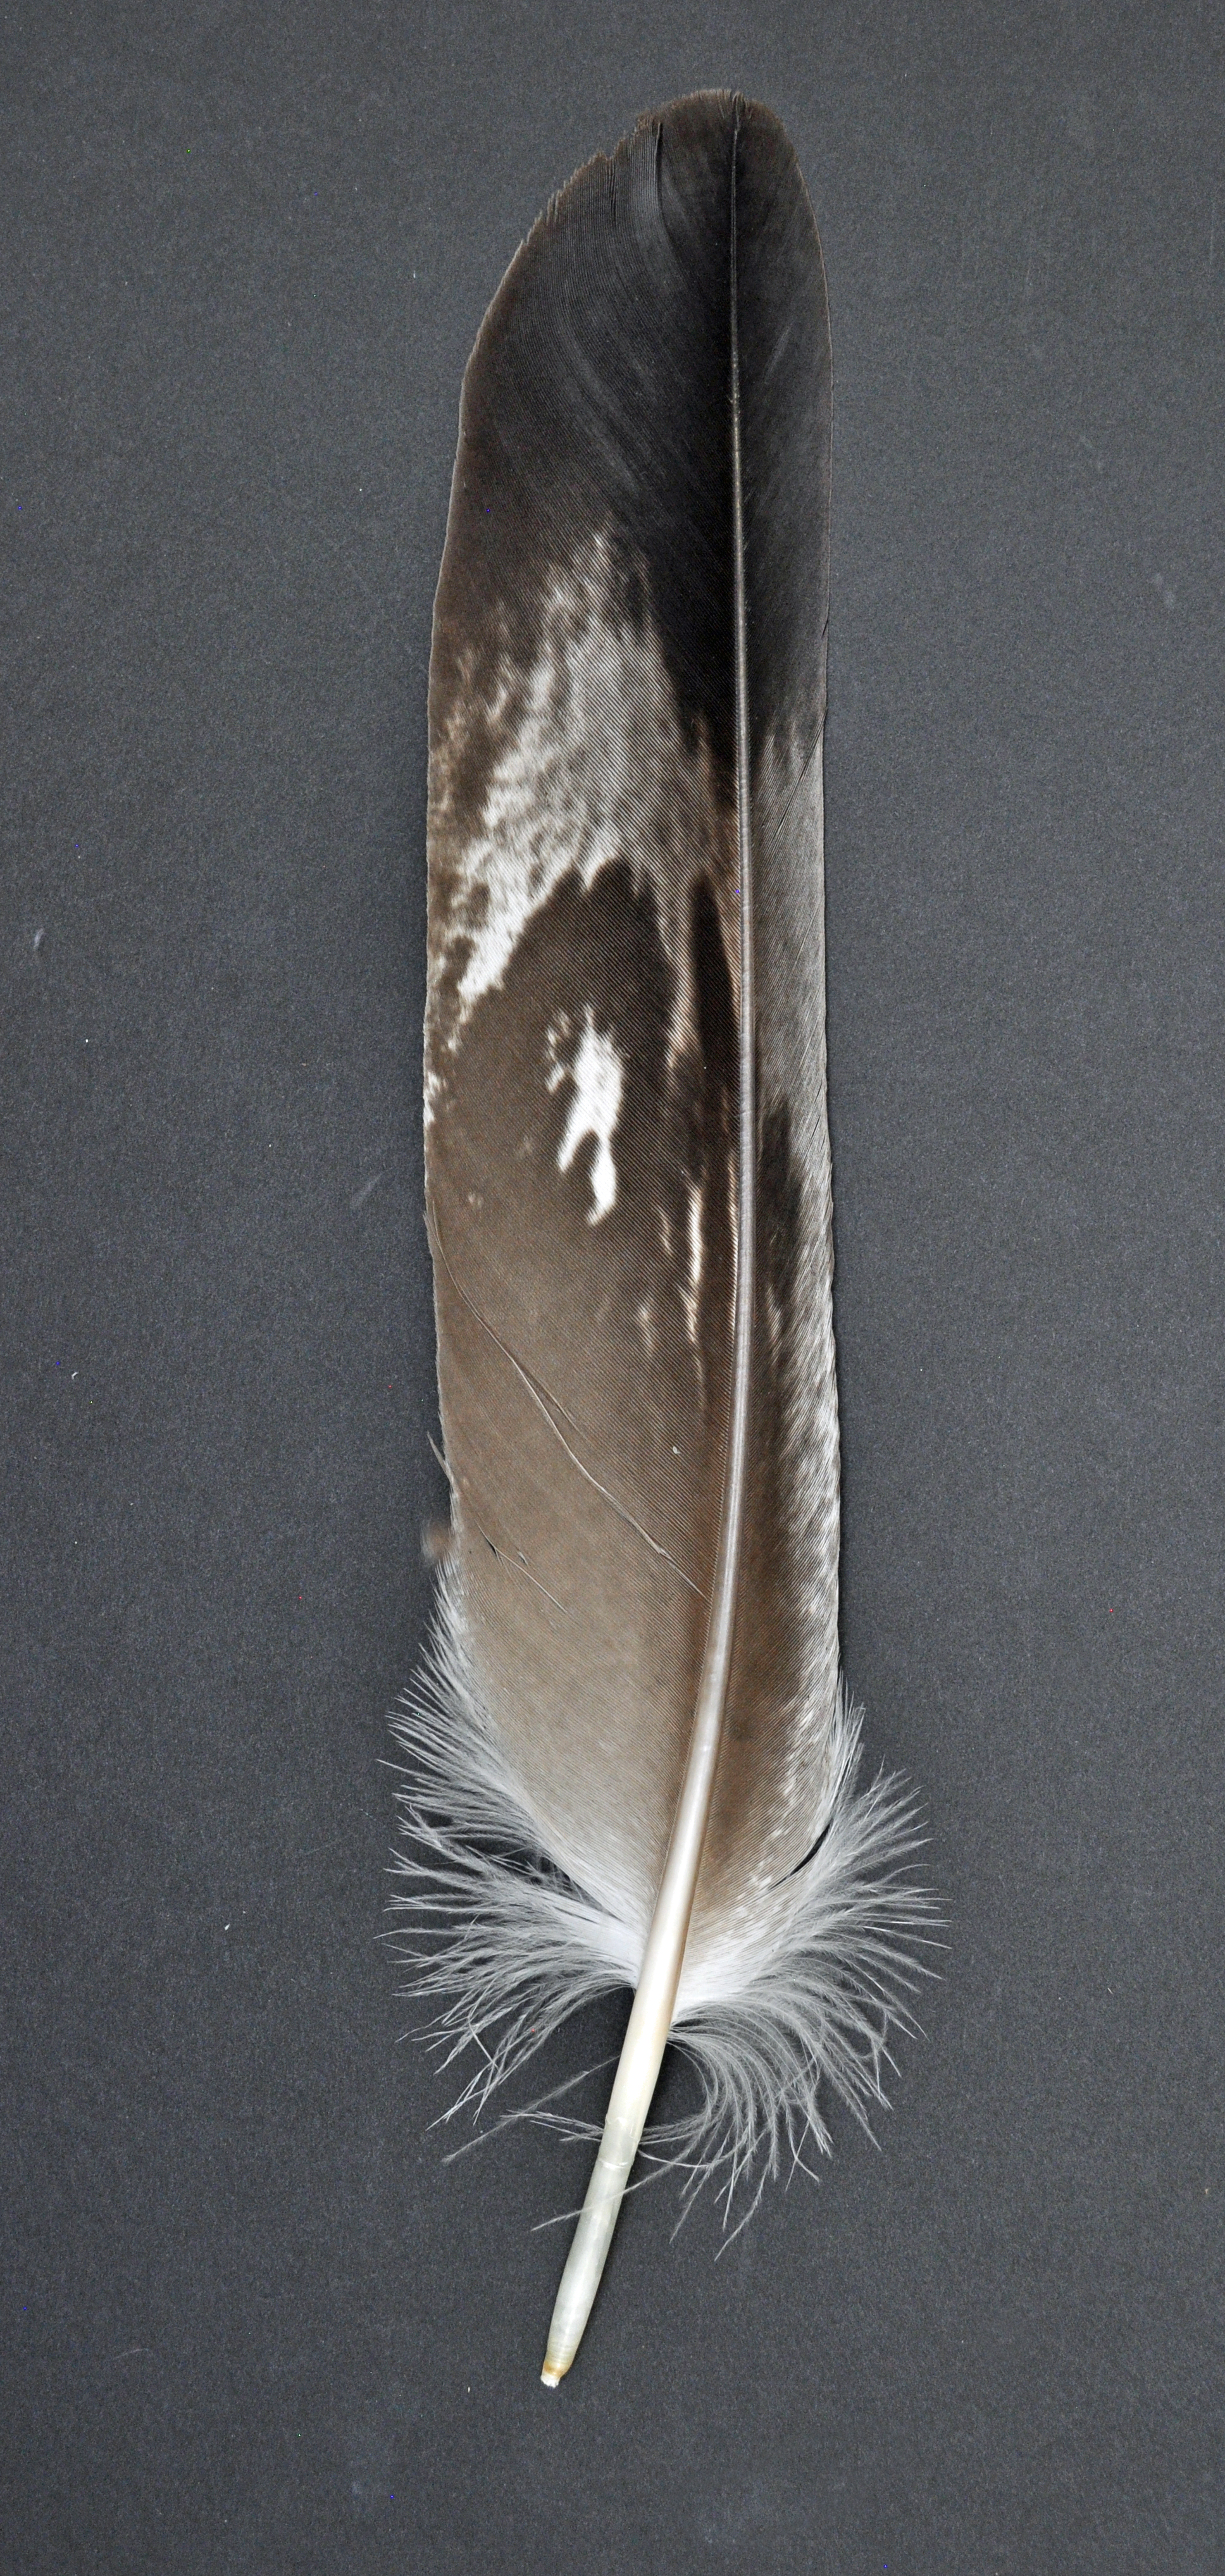 How to identify bird feathers - Discover Wildlife